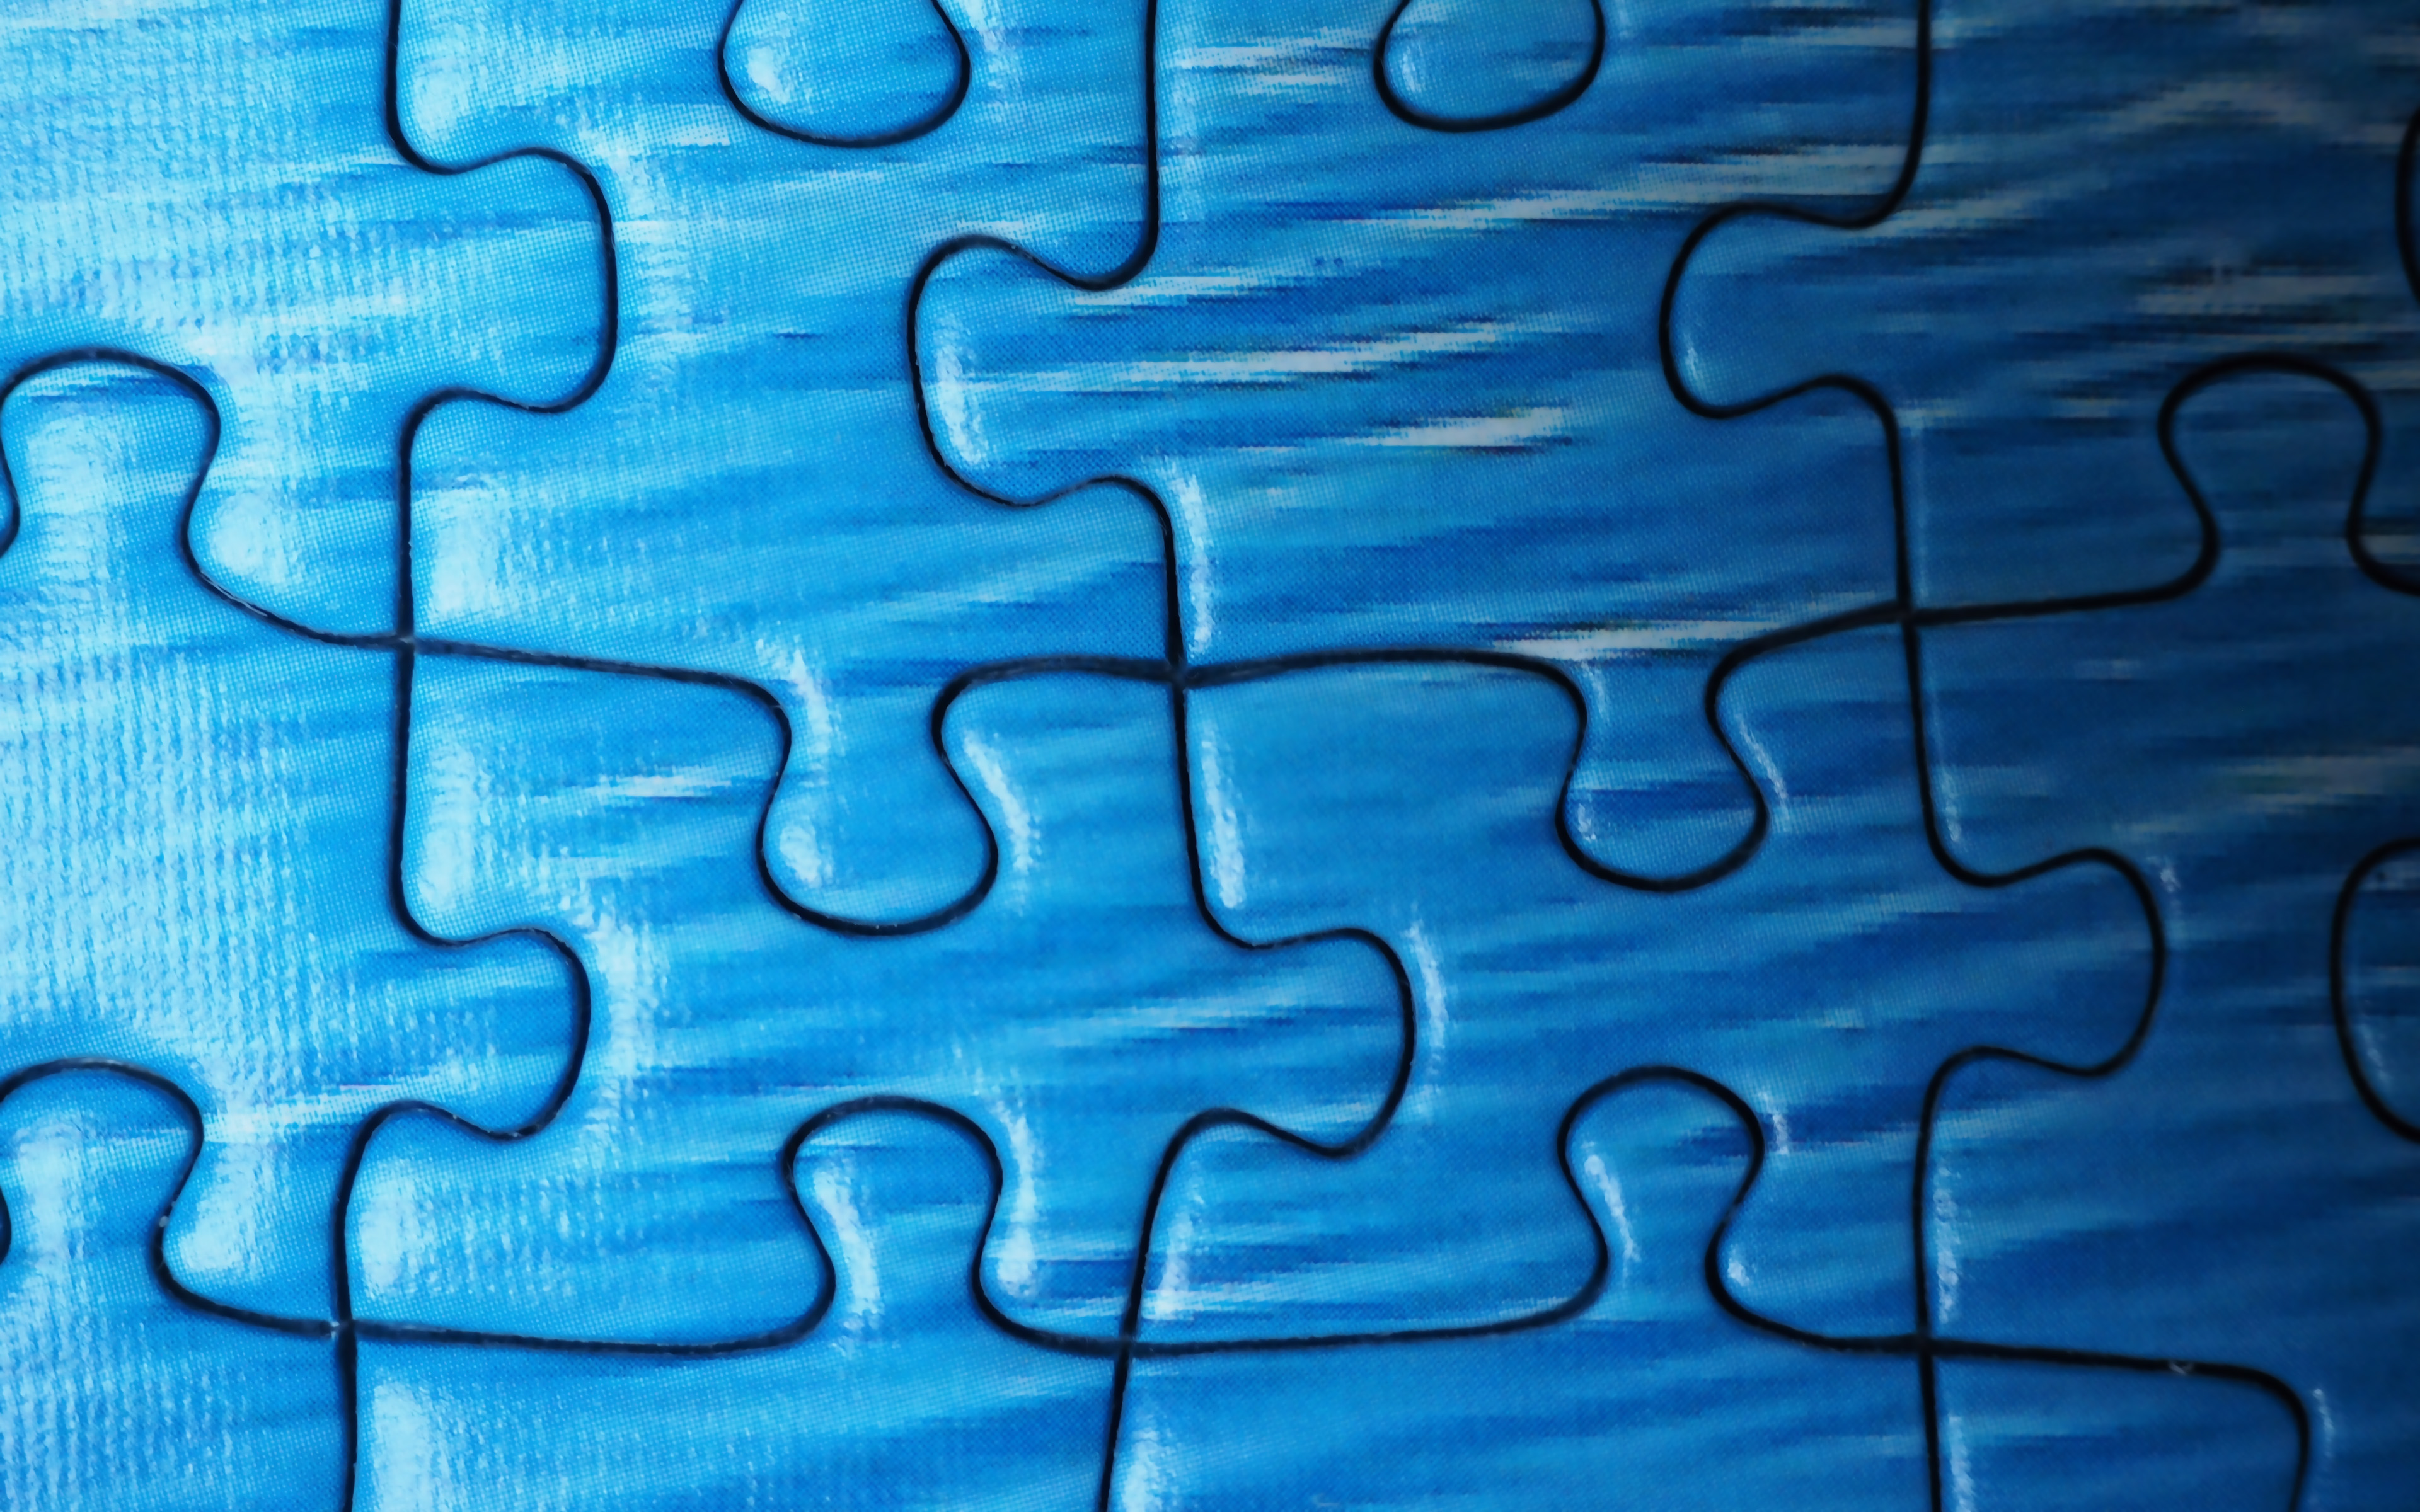 Download wallpapers 4k, blue puzzles, macro, blue puzzles background